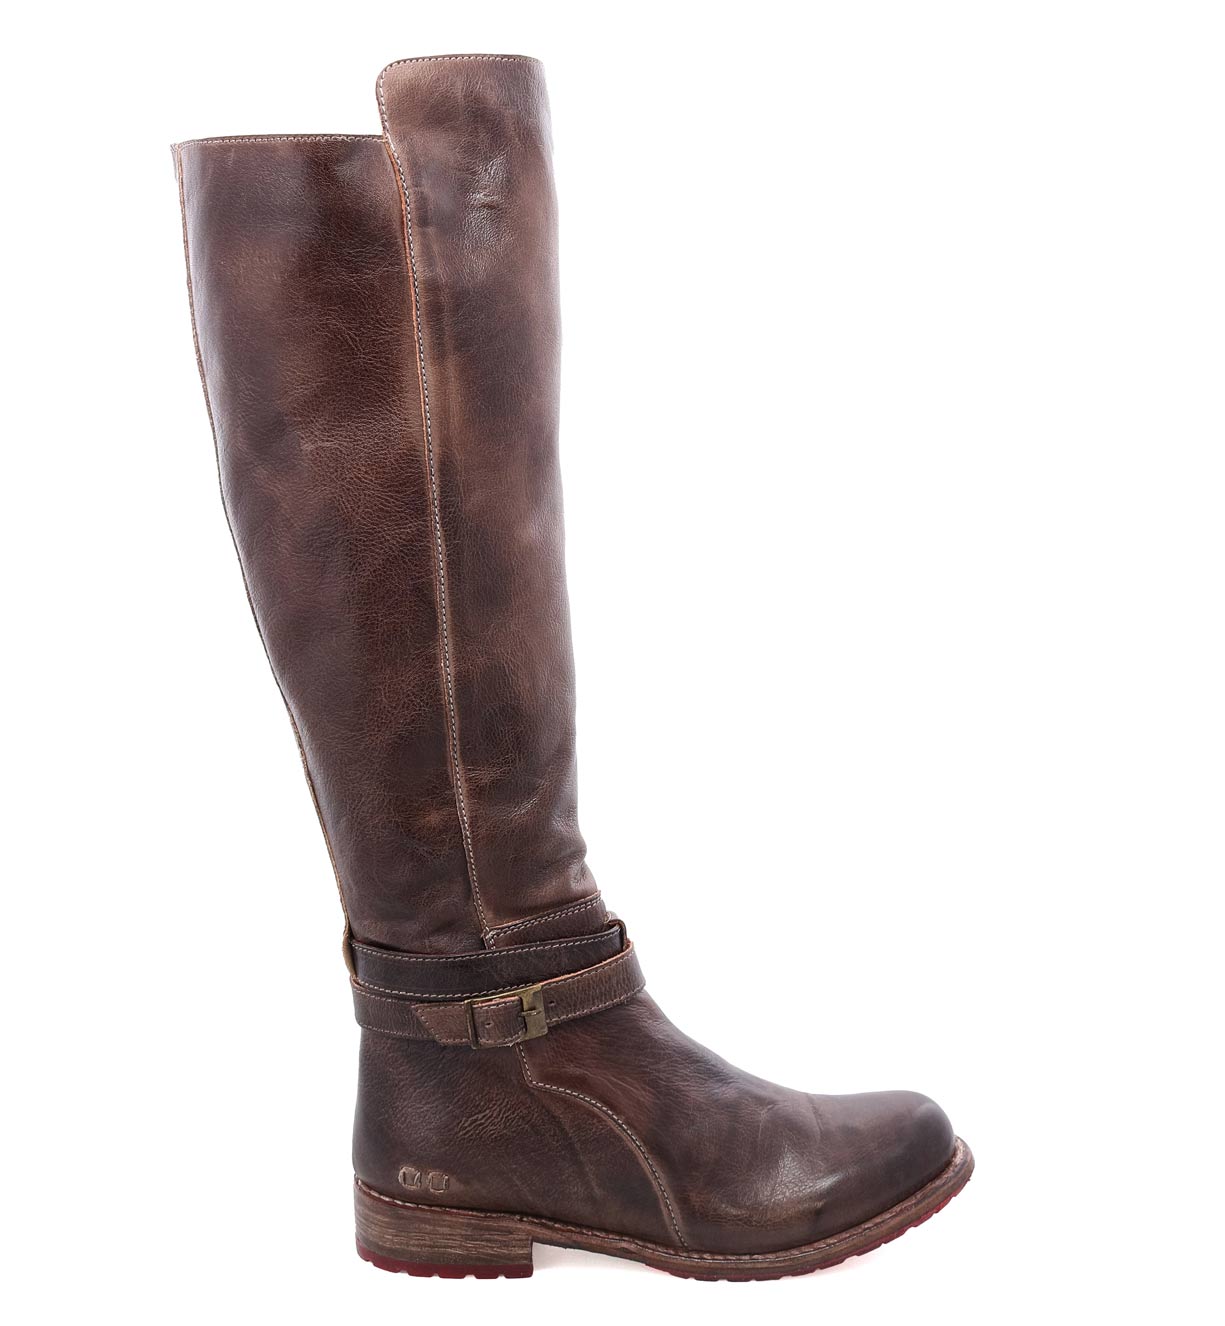 A women's brown leather Bed Stu Bristol riding boot.